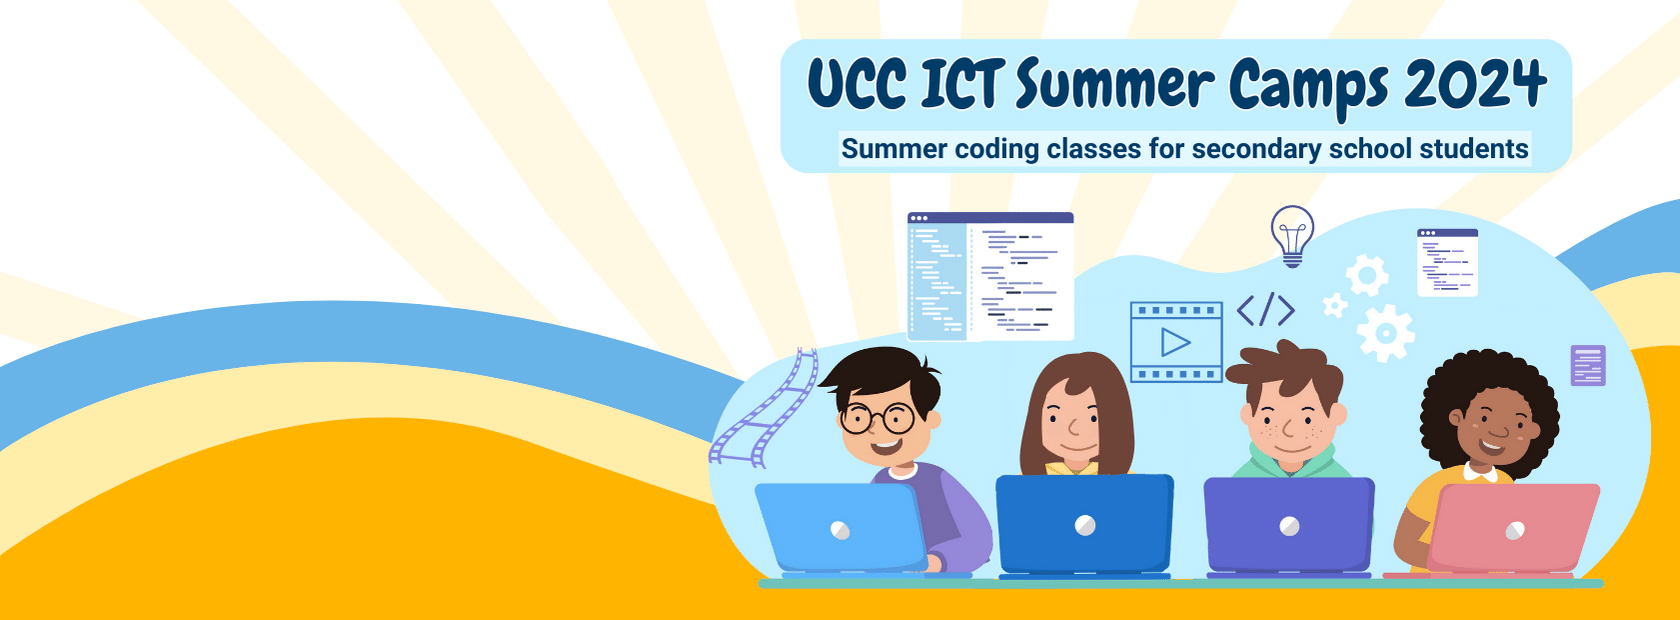 decorative banner advertising ICT Summer Camps for secondary school students 4th to 8th June